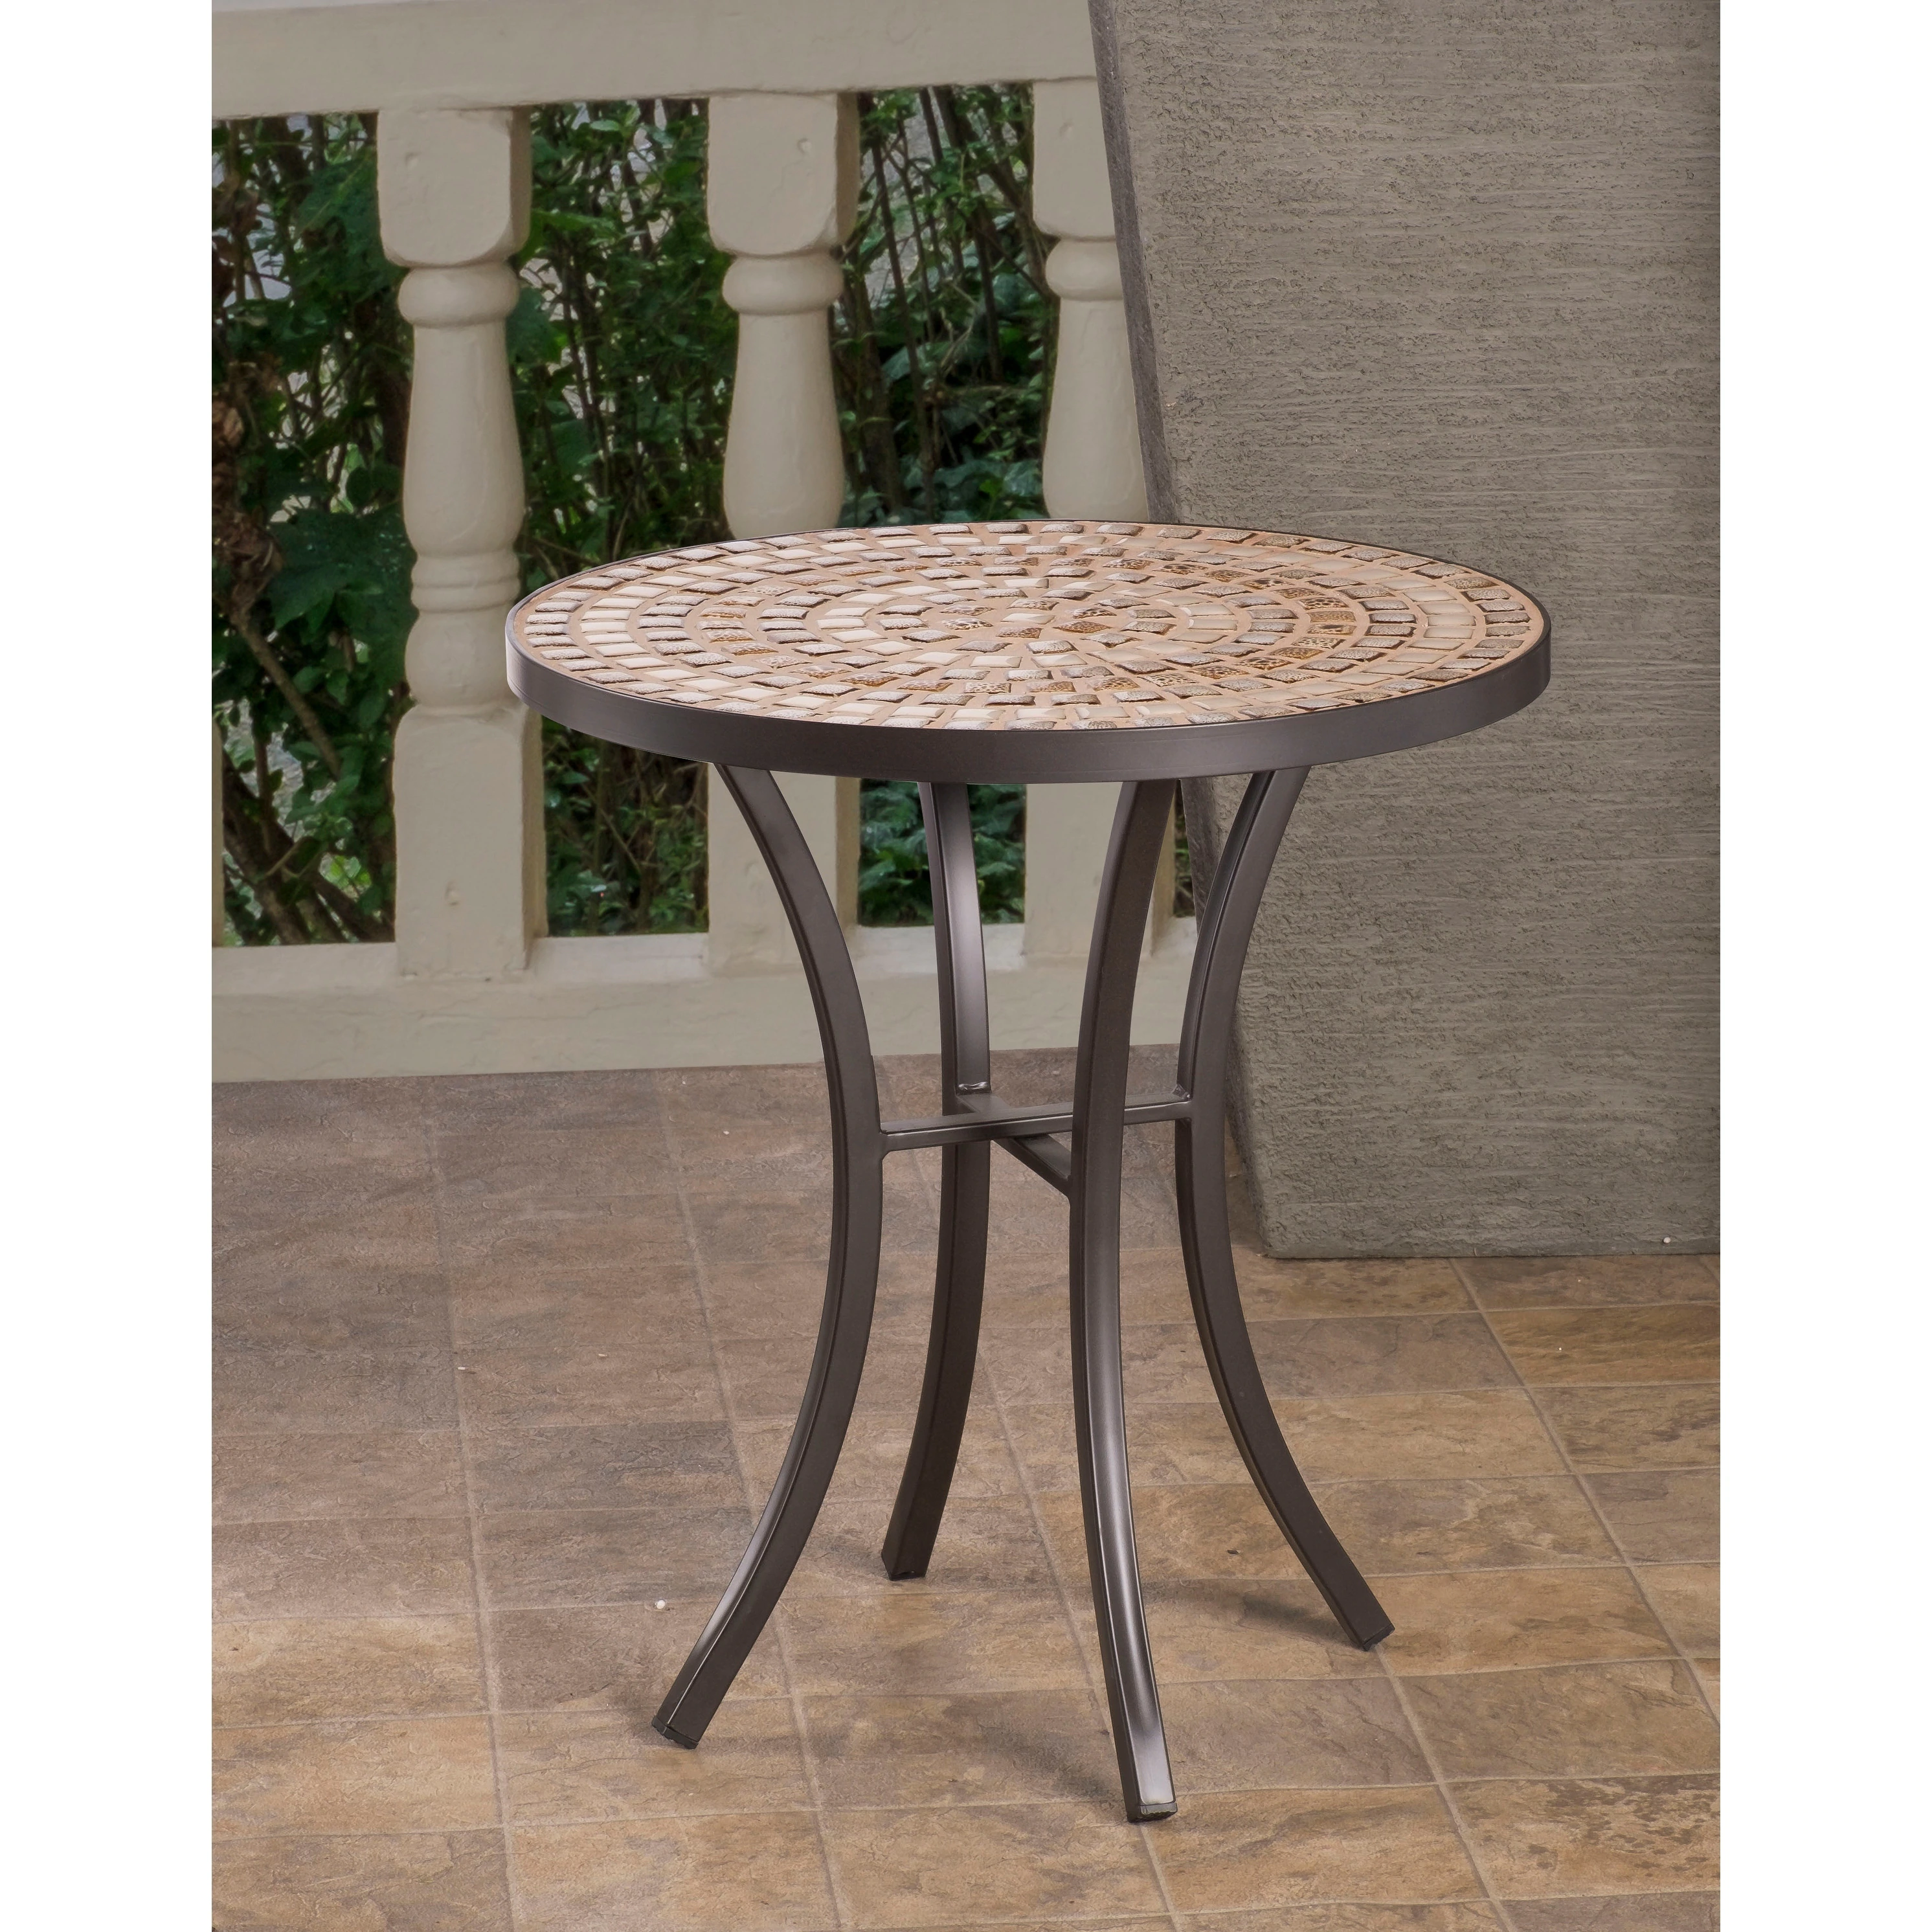 boracay beige ceramic and wrought iron inch round mosaic outdoor side table homesense coffee mirrored end target between two recliners light shower head lounge furniture clearance